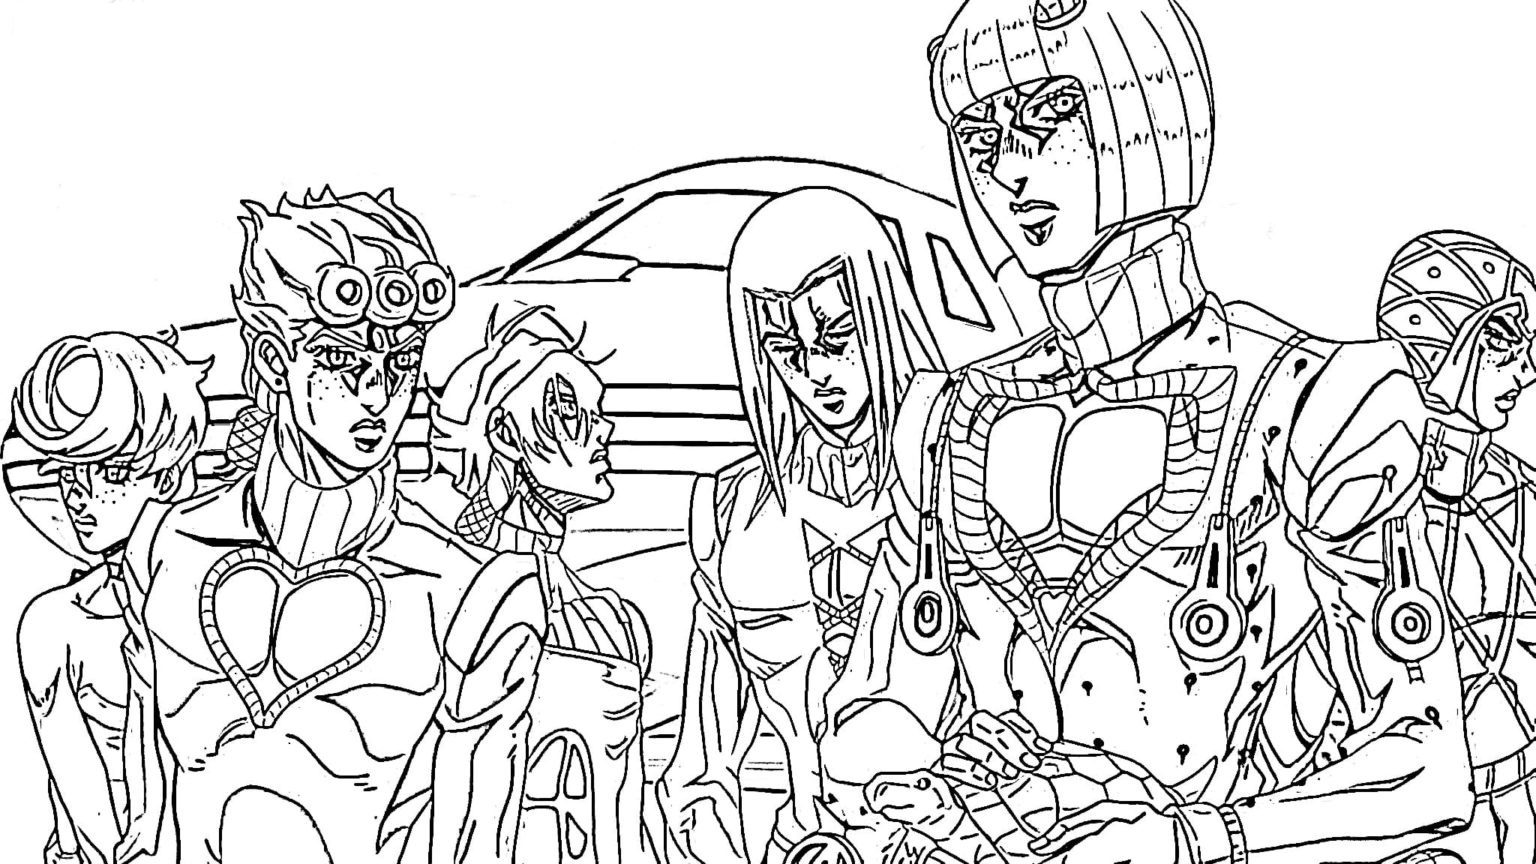 JoJo's Bizarre Adventure Characters Coloring Pages